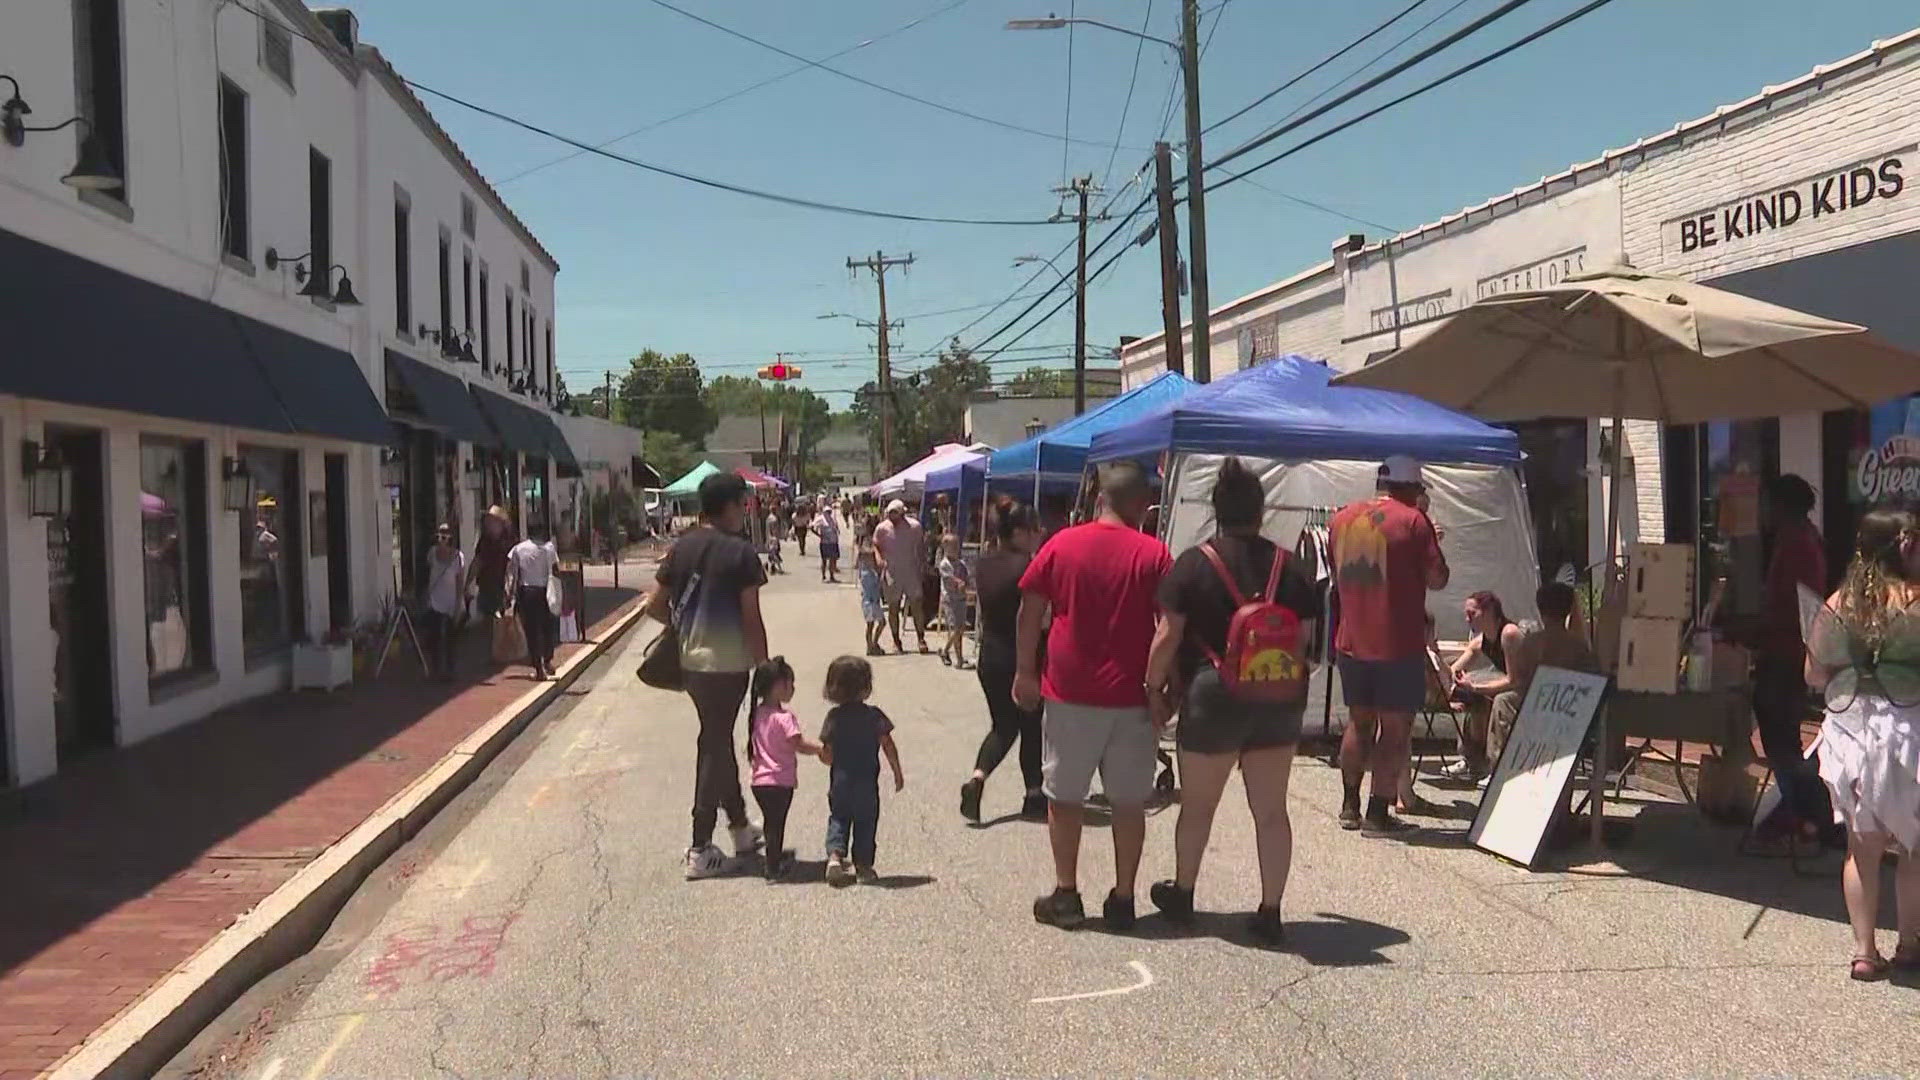 Organizers want to highlight local businesses as well.